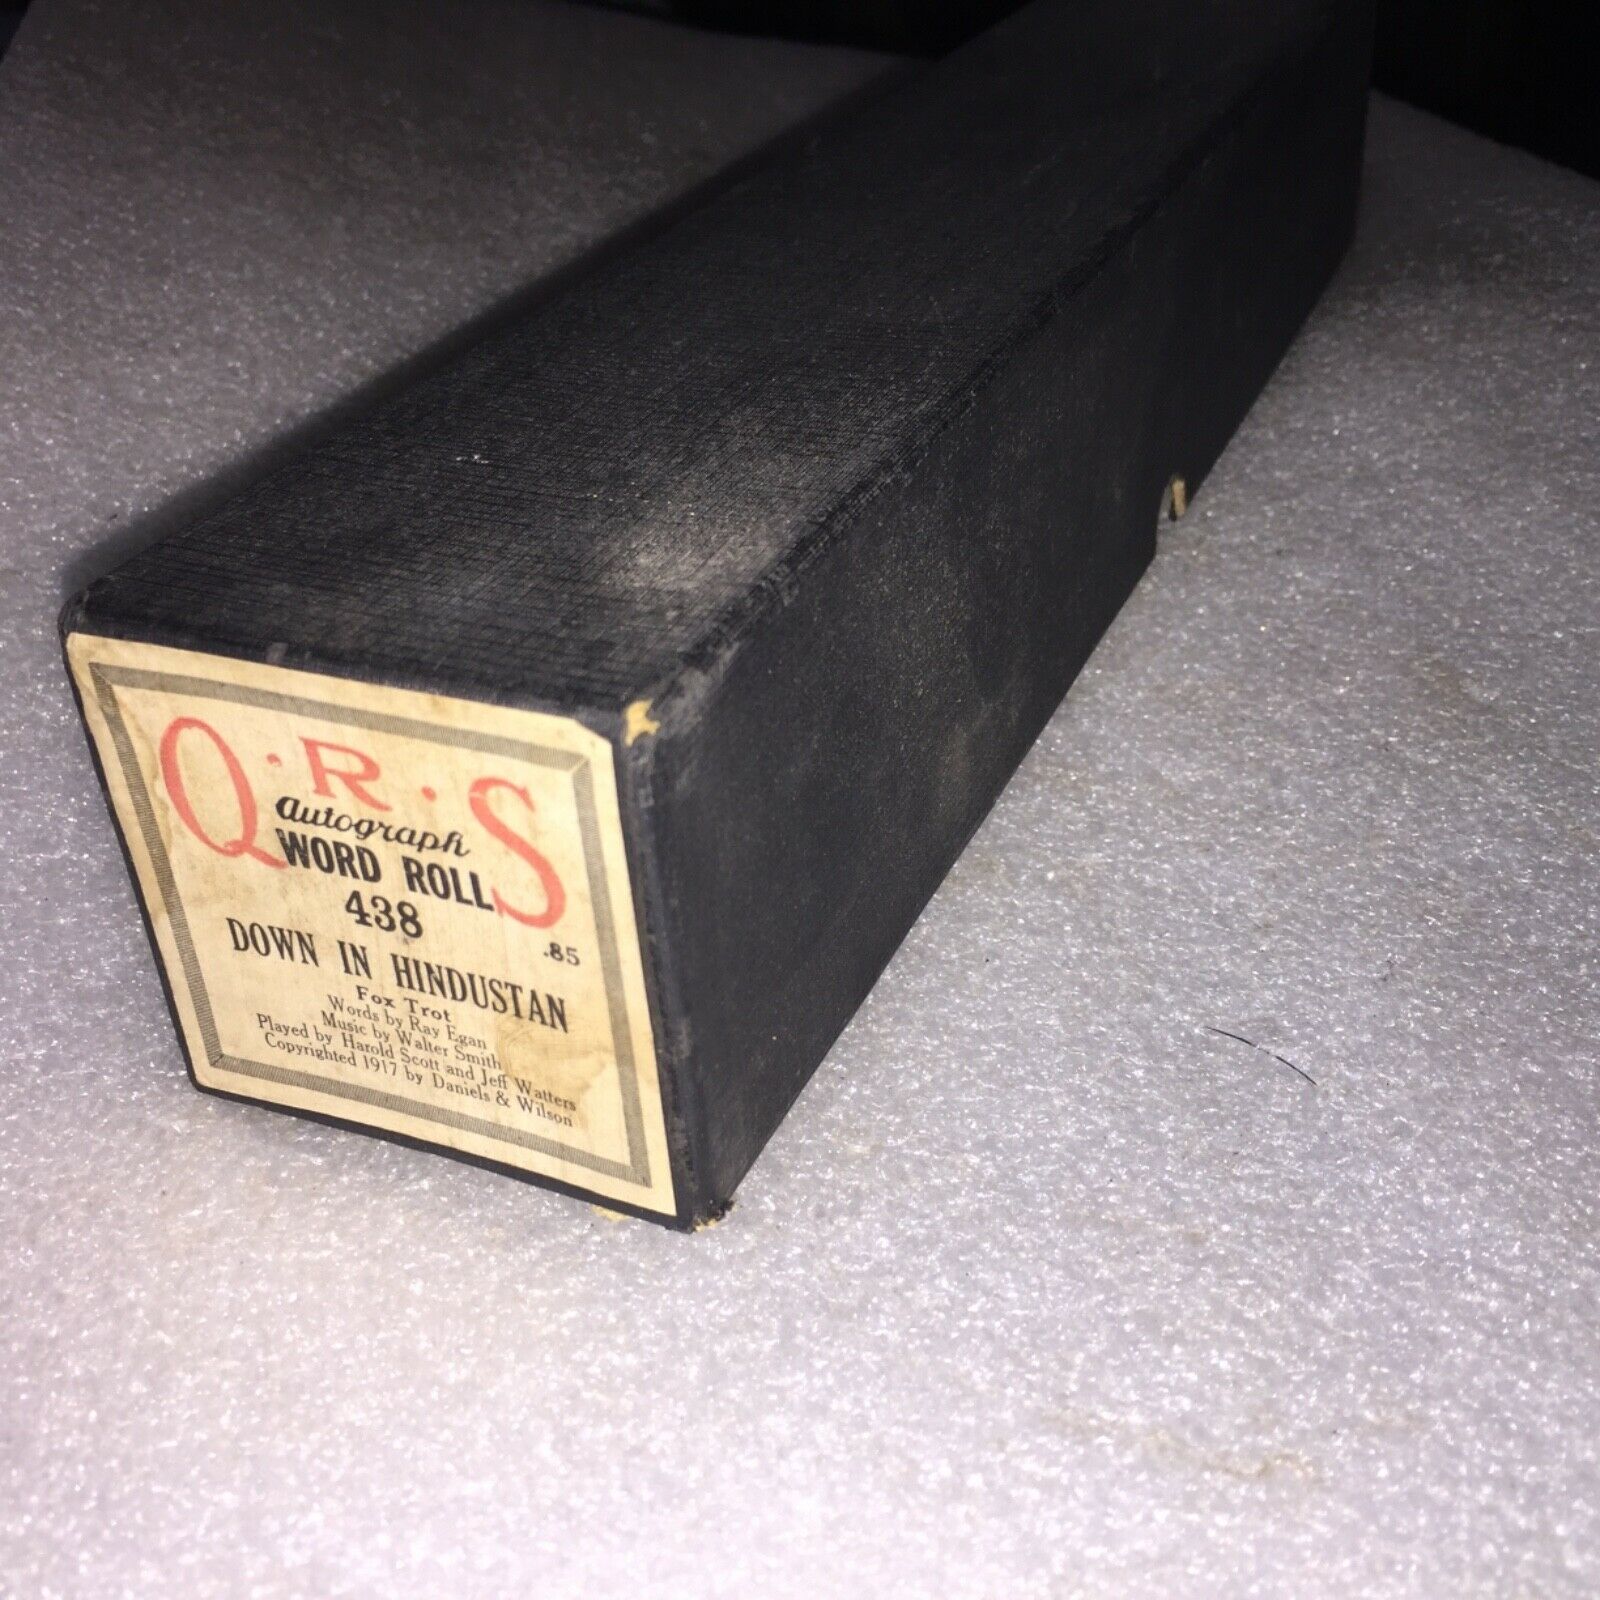 Vintage 1917 Qrs Down In Hindustan Piano Roll #438